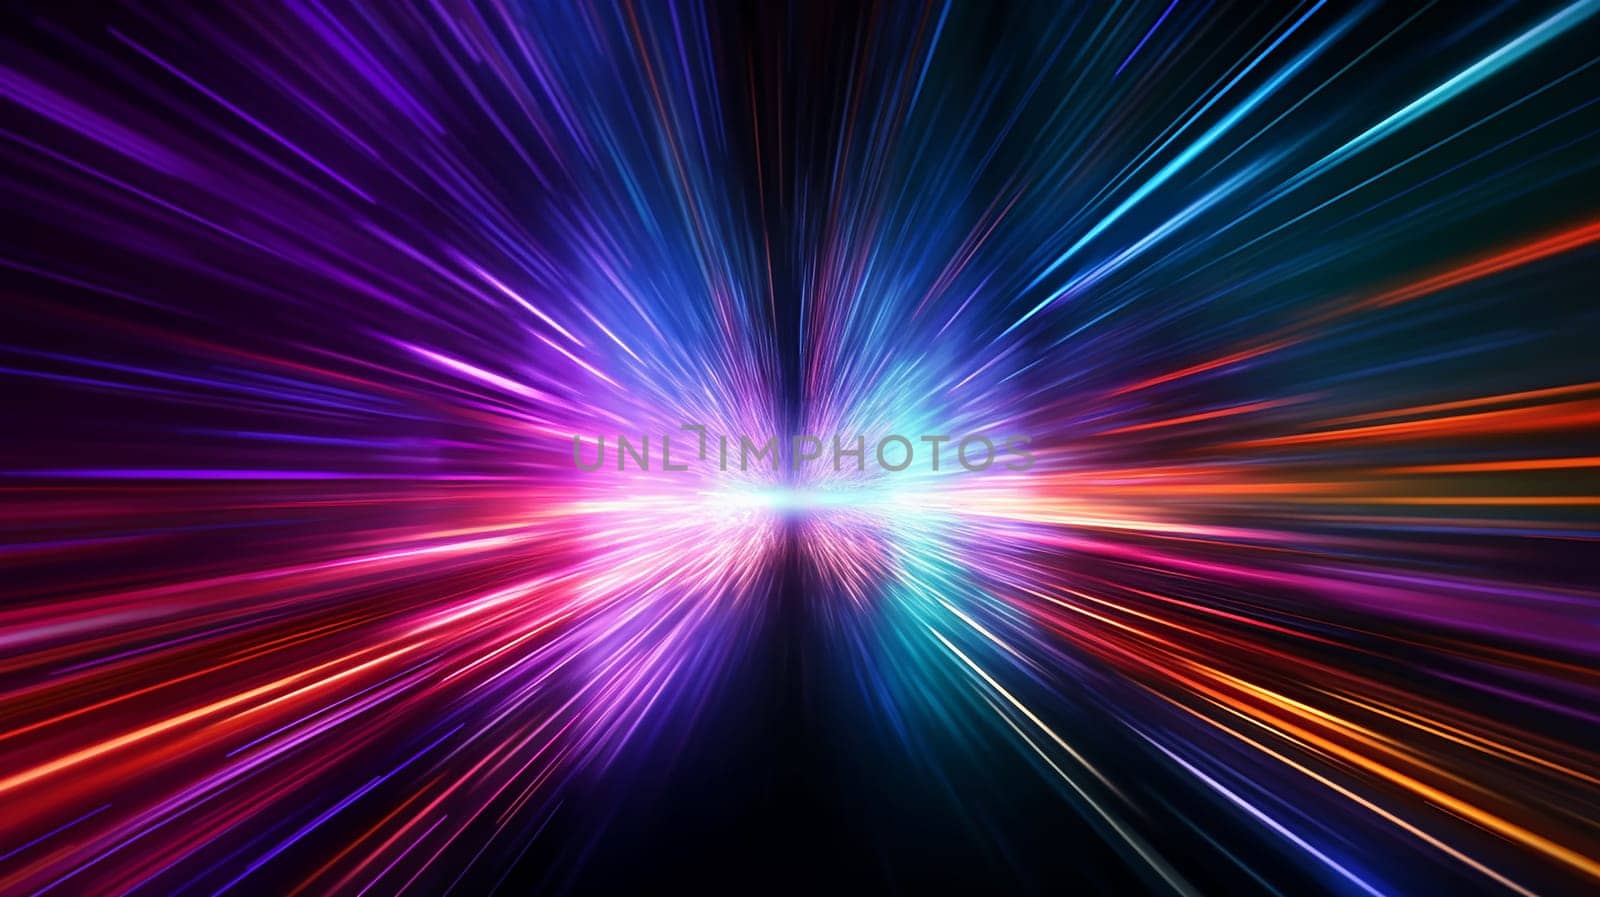 Abstract neon light streaks radiating from central point with vibrant colors, speed concept by Hype2art